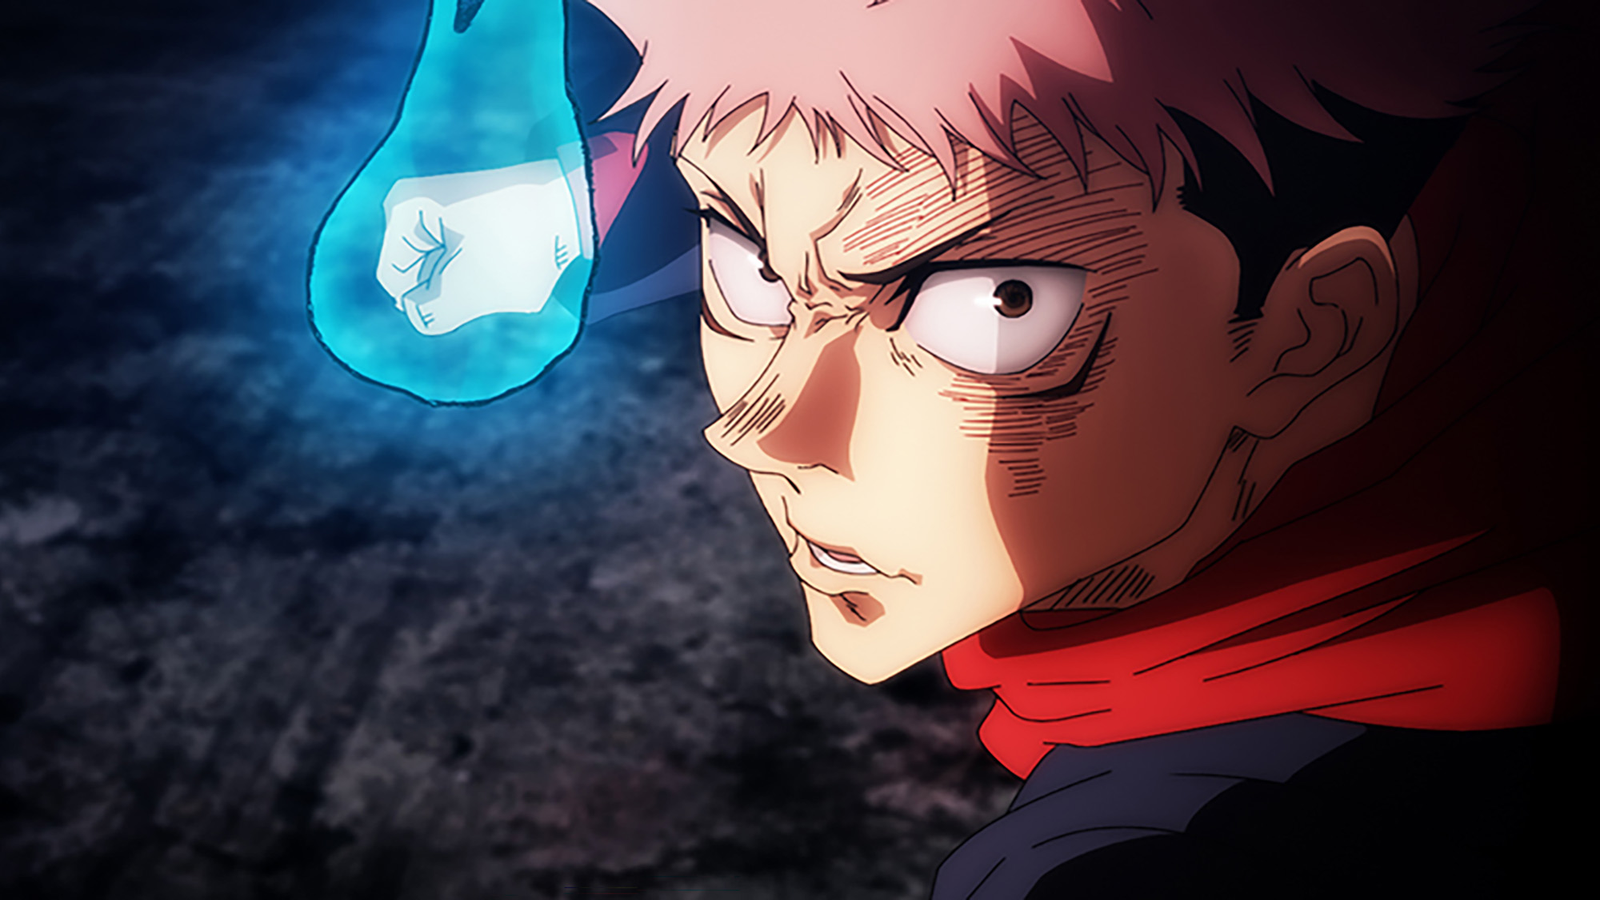 How to watch Jujutsu Kaisen in order (TV series and movie)